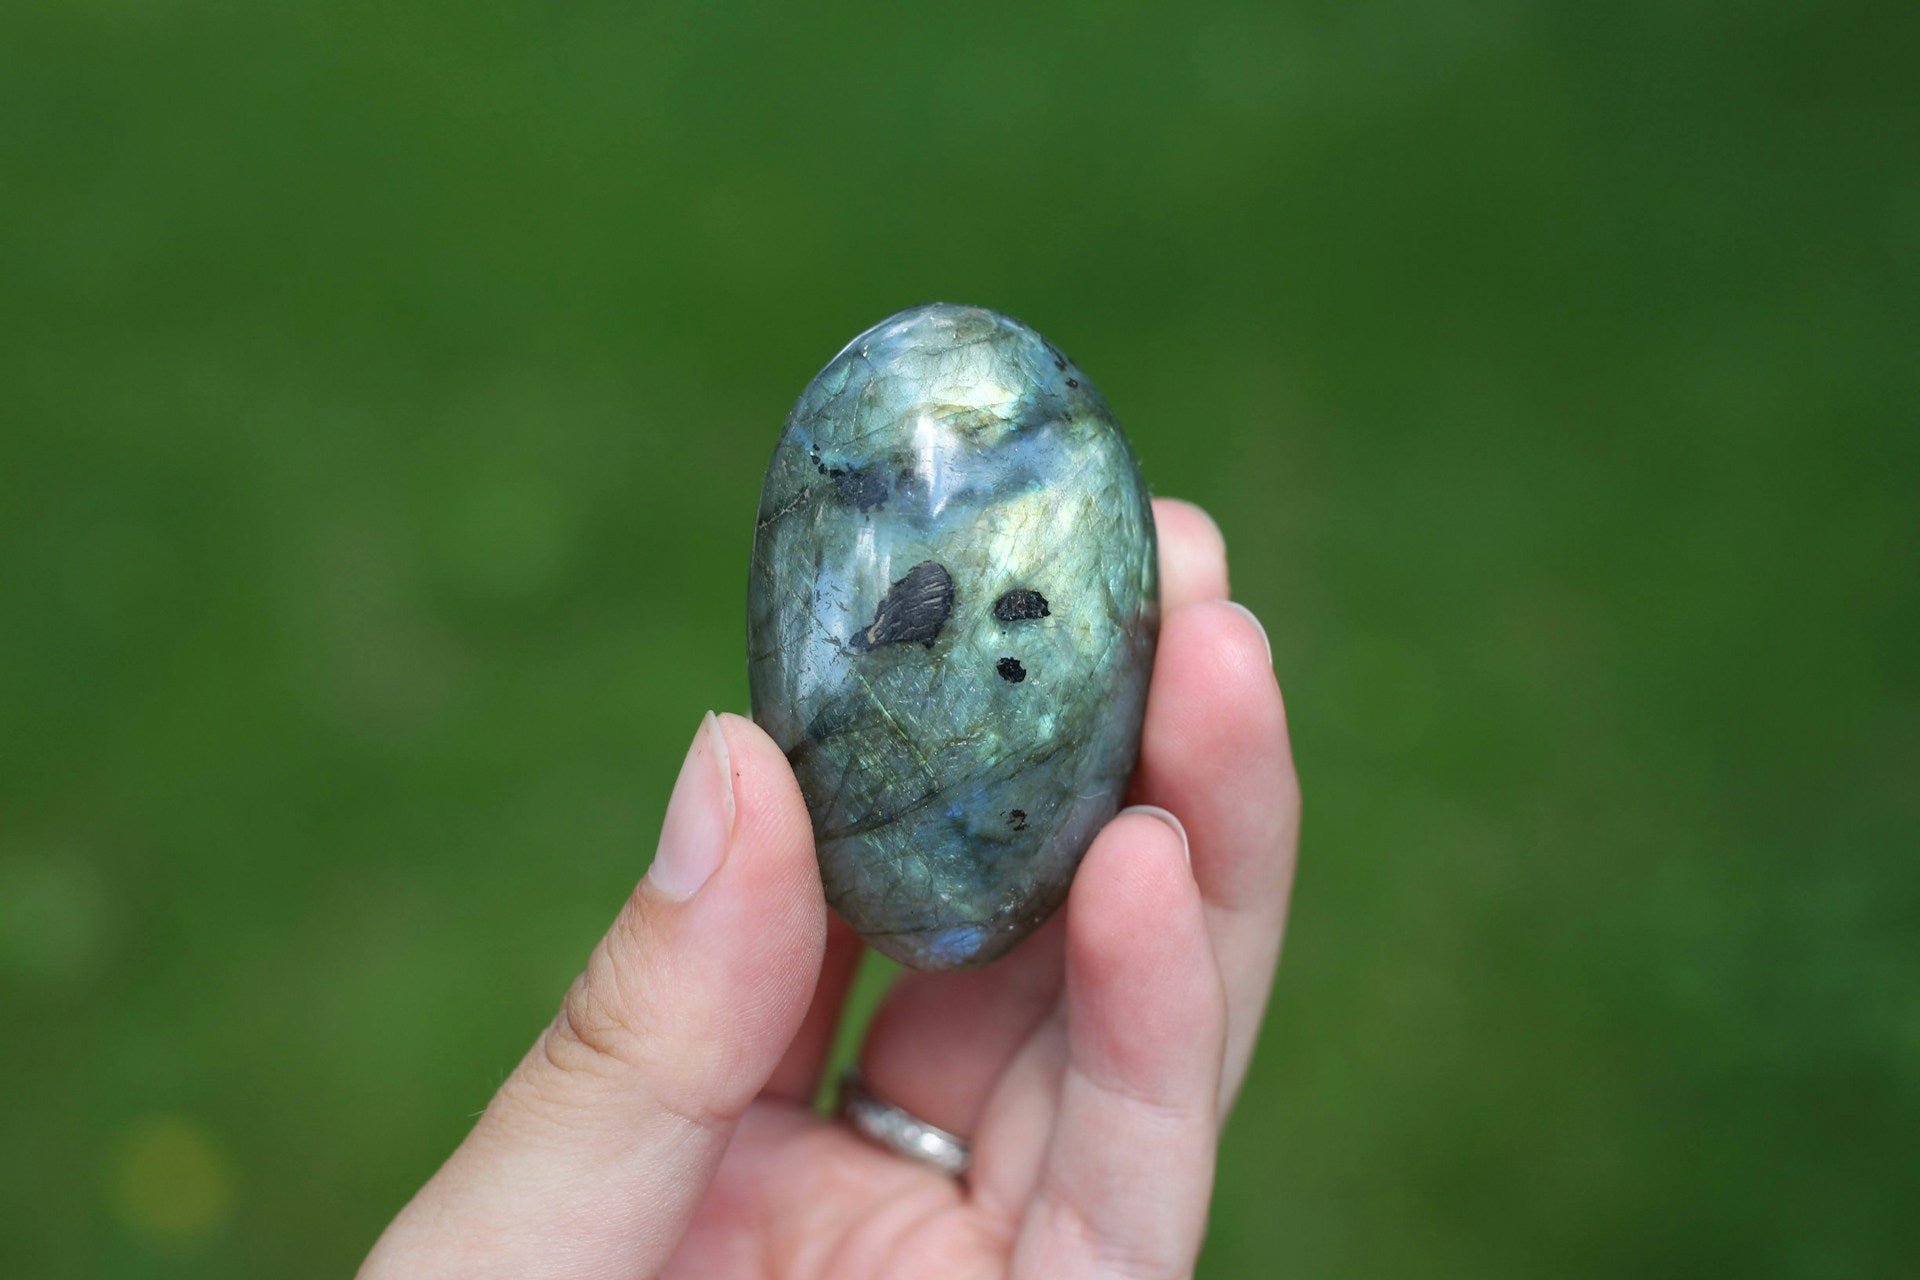 A close-up of someone holding up a piece of Labradorite